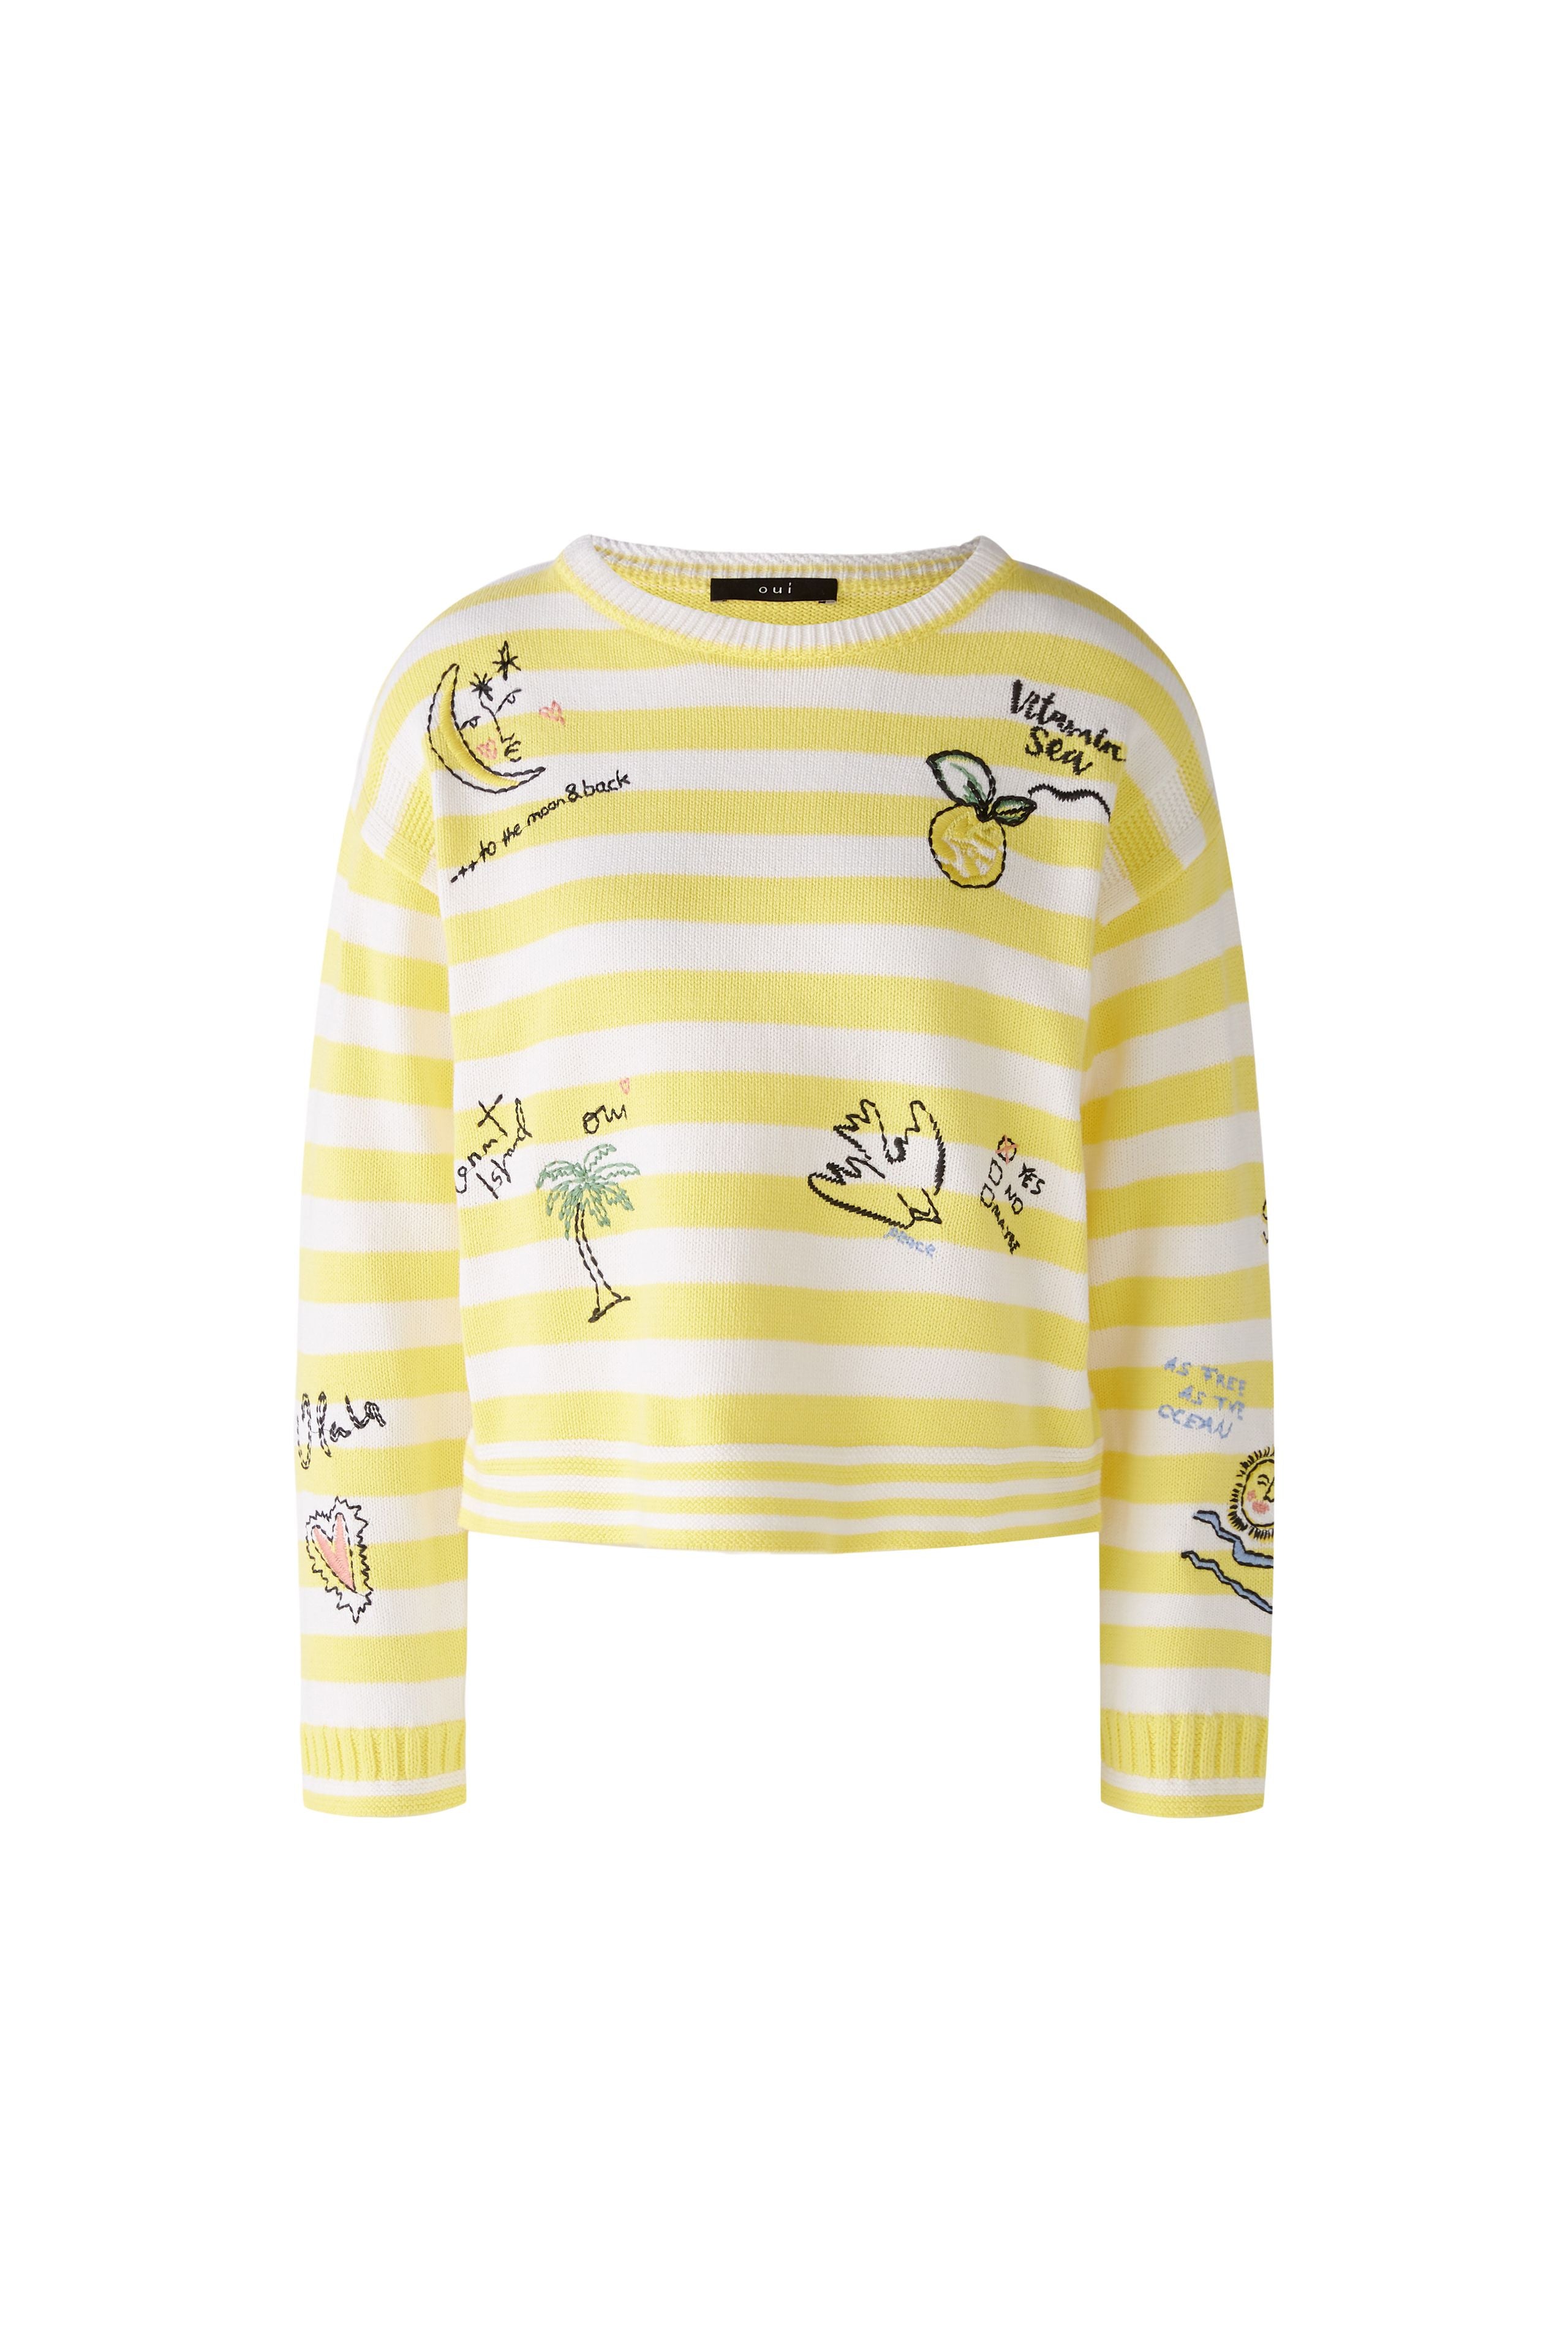 Embroidered Detail Jumper in White/Yellow